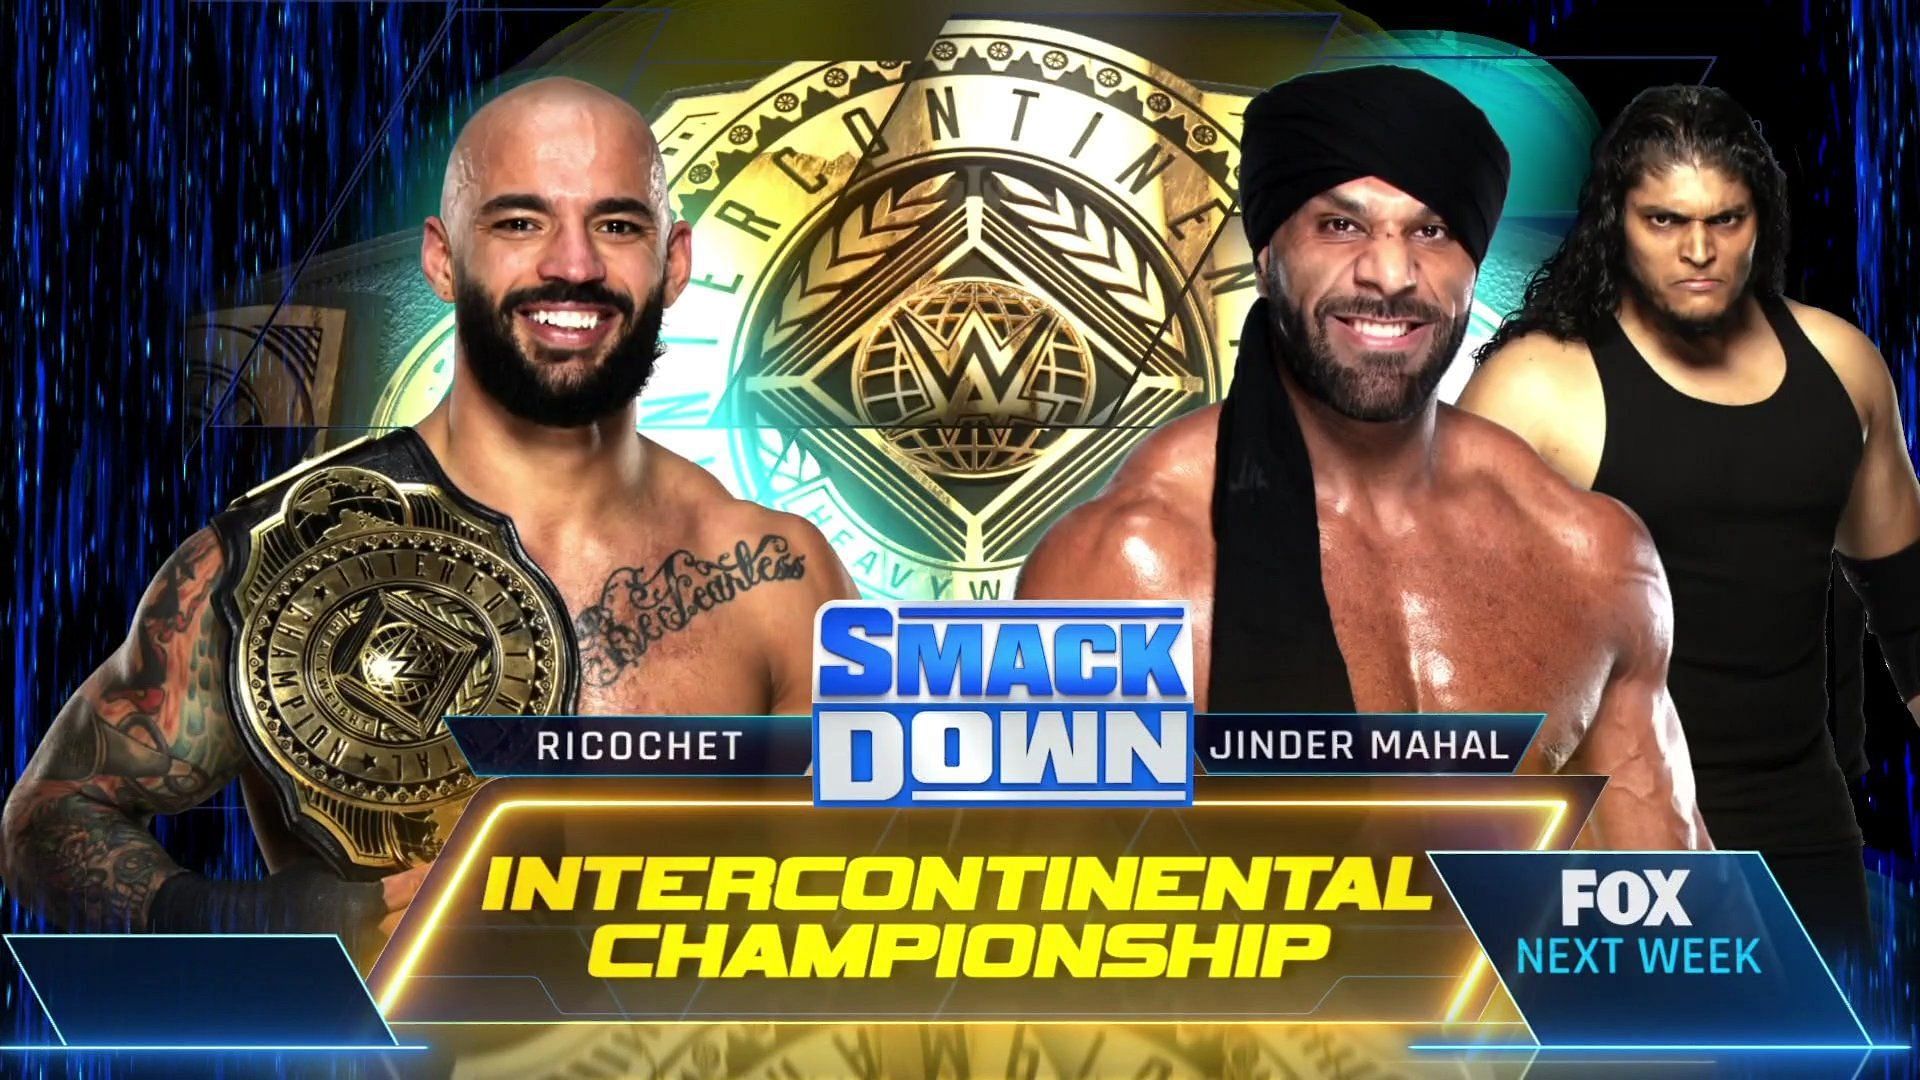 Ricochet will defend the WWE Intercontinental Championship against Jinder Mahal on SmackDown